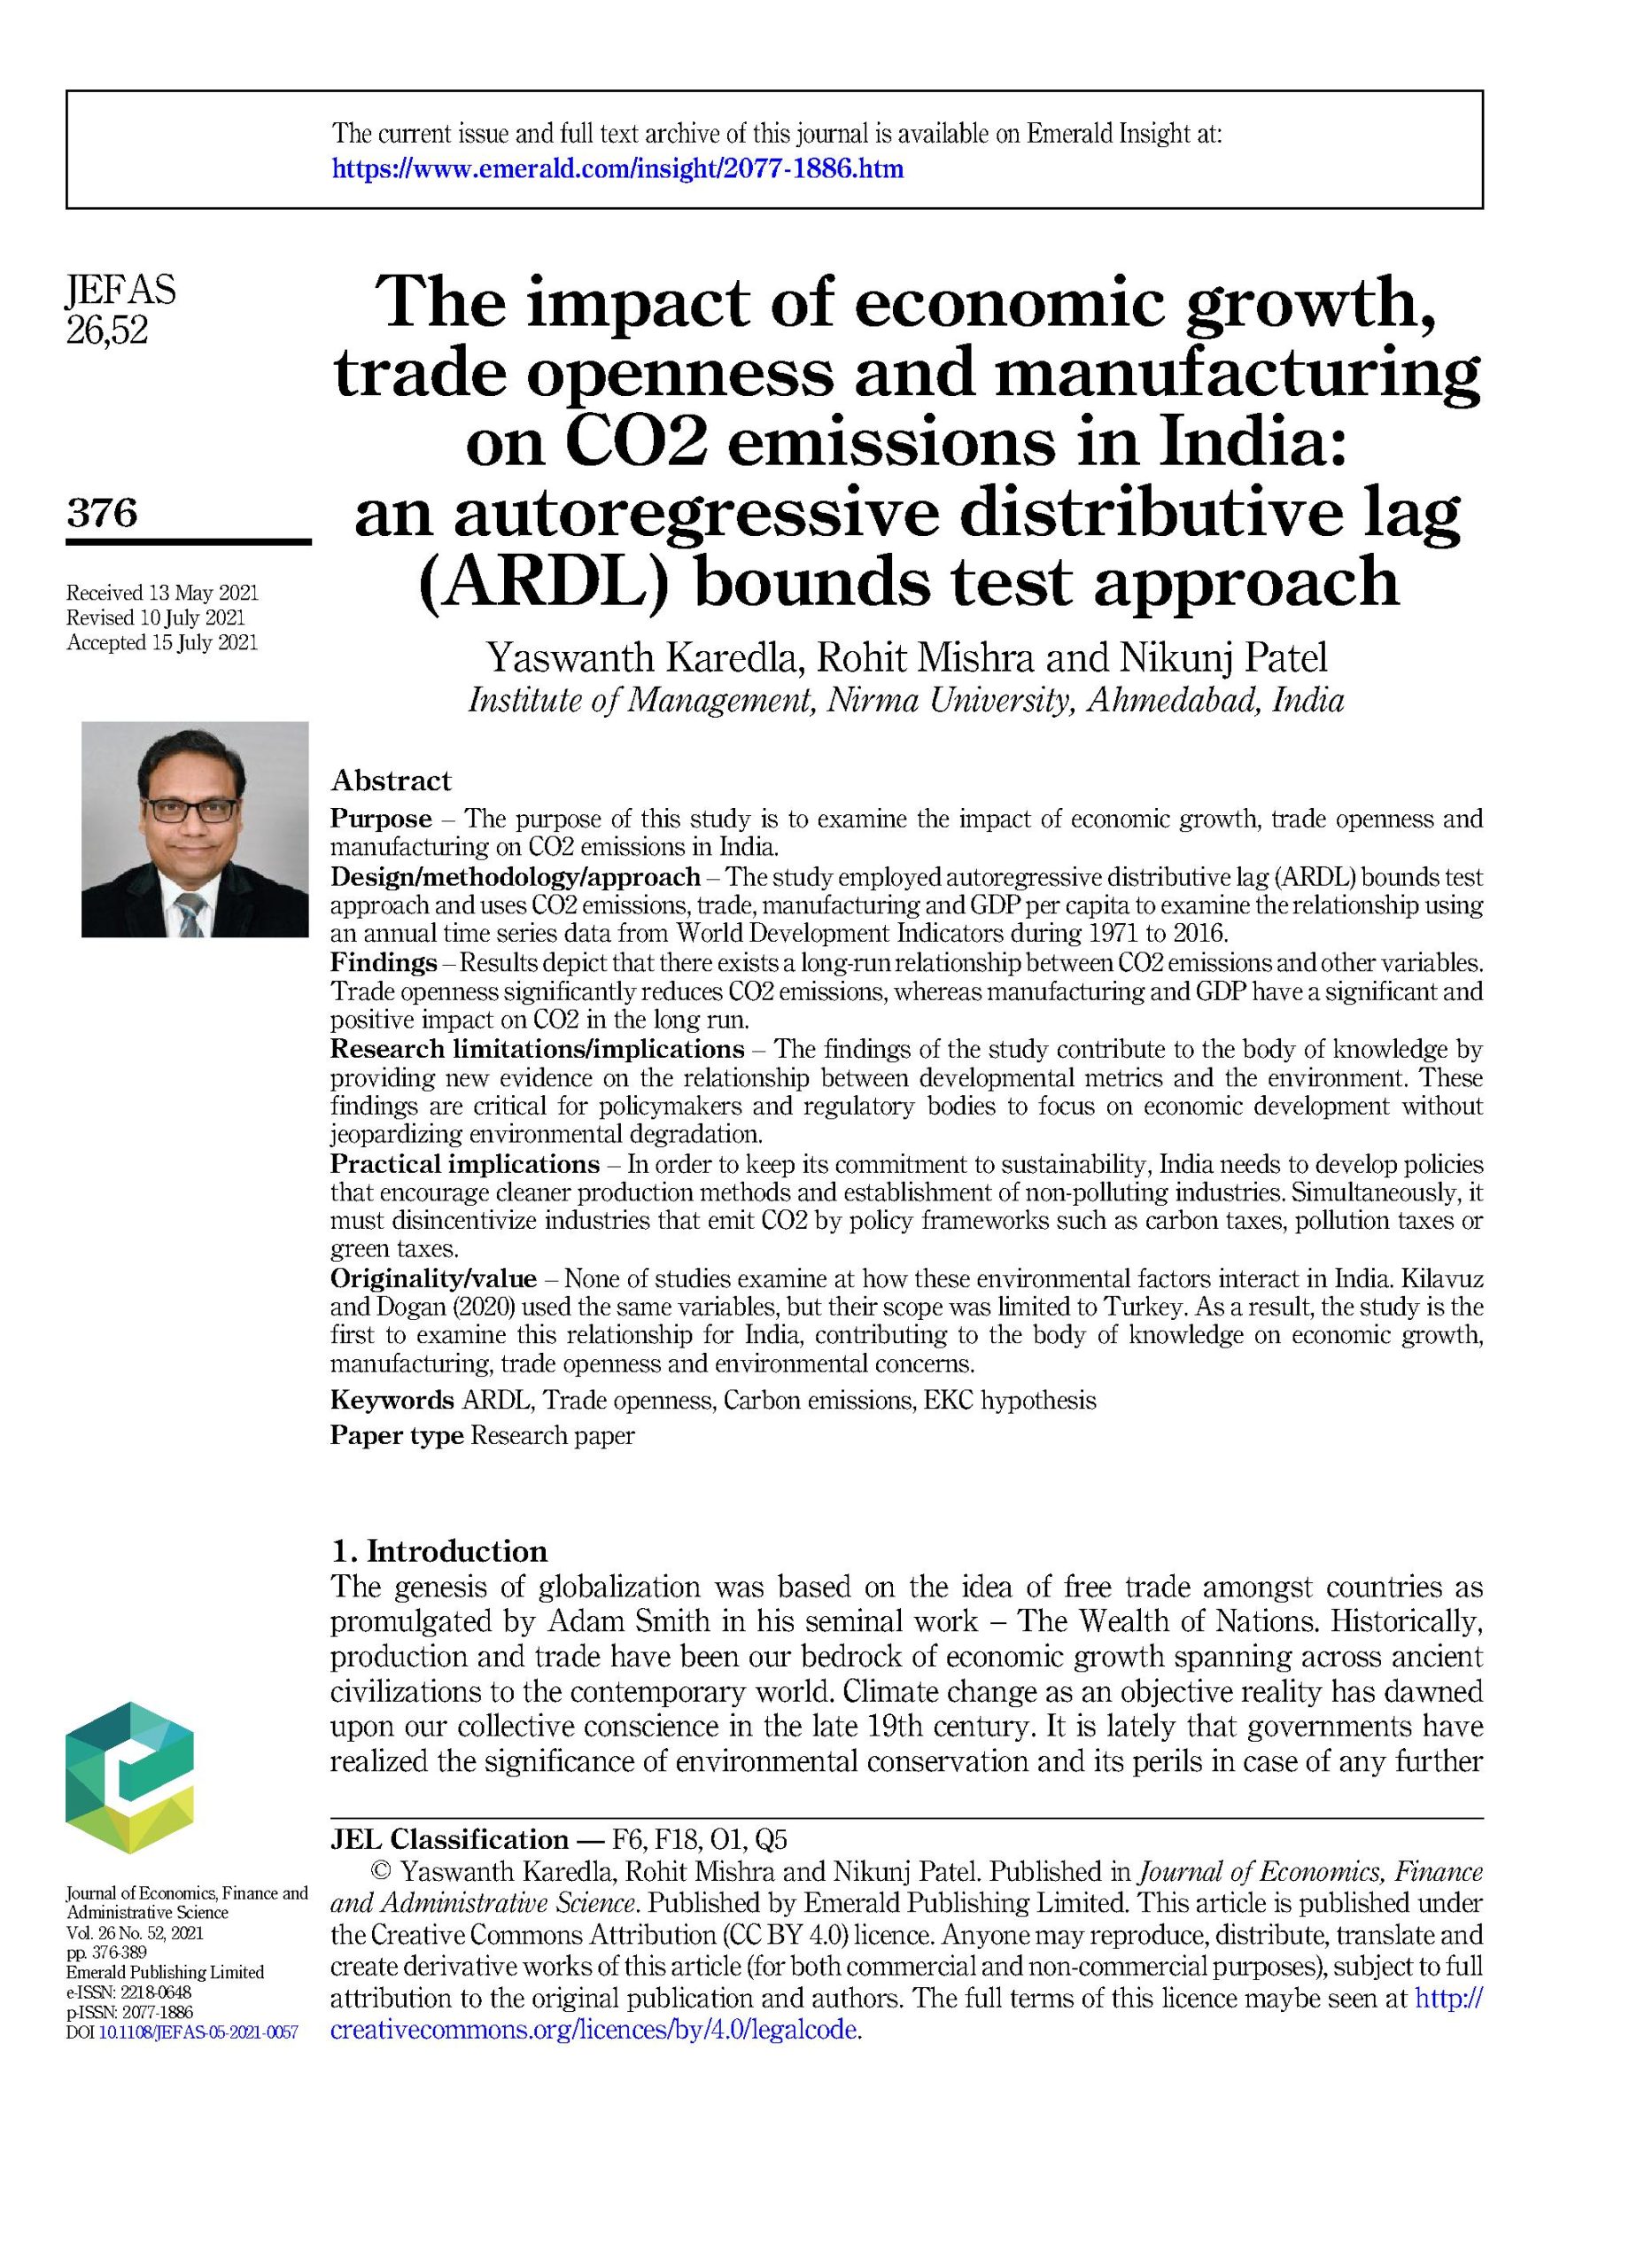 The impact of economic growth, trade openness and manufacturing on CO2 emissions in India: an autoregressive distributive lag (ARDL) bounds test approach